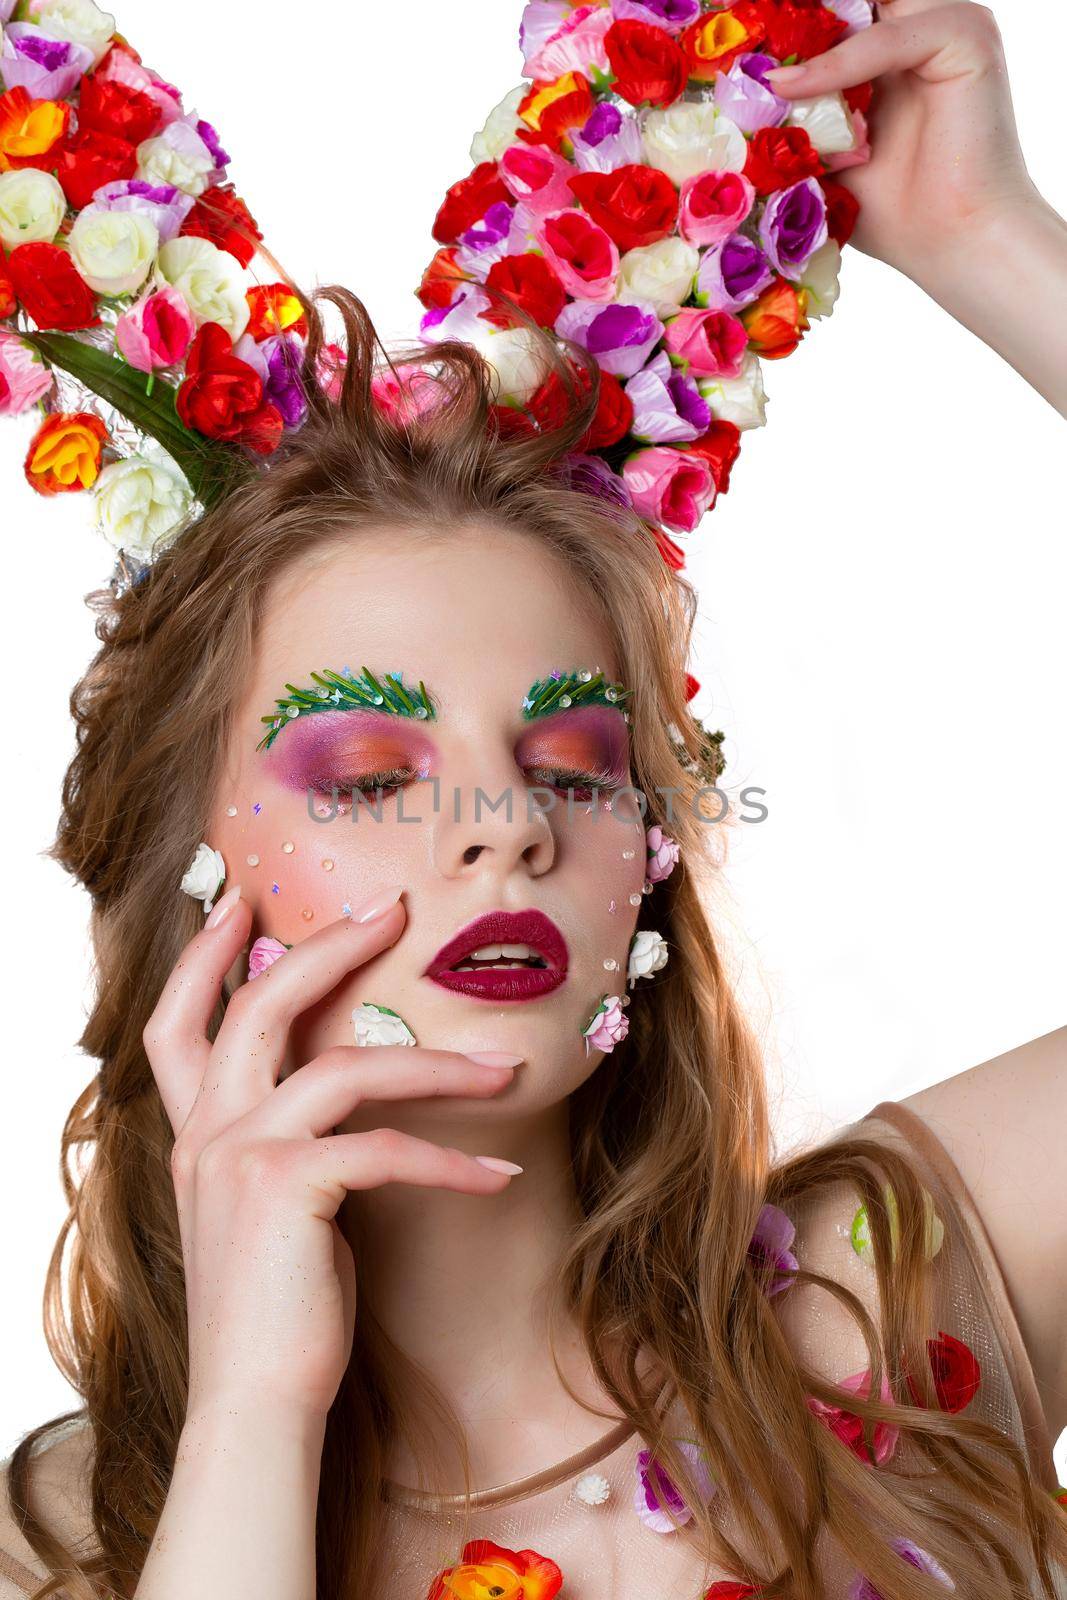 Fairytale spring girl model with floral horns and bright makeup on a white background.